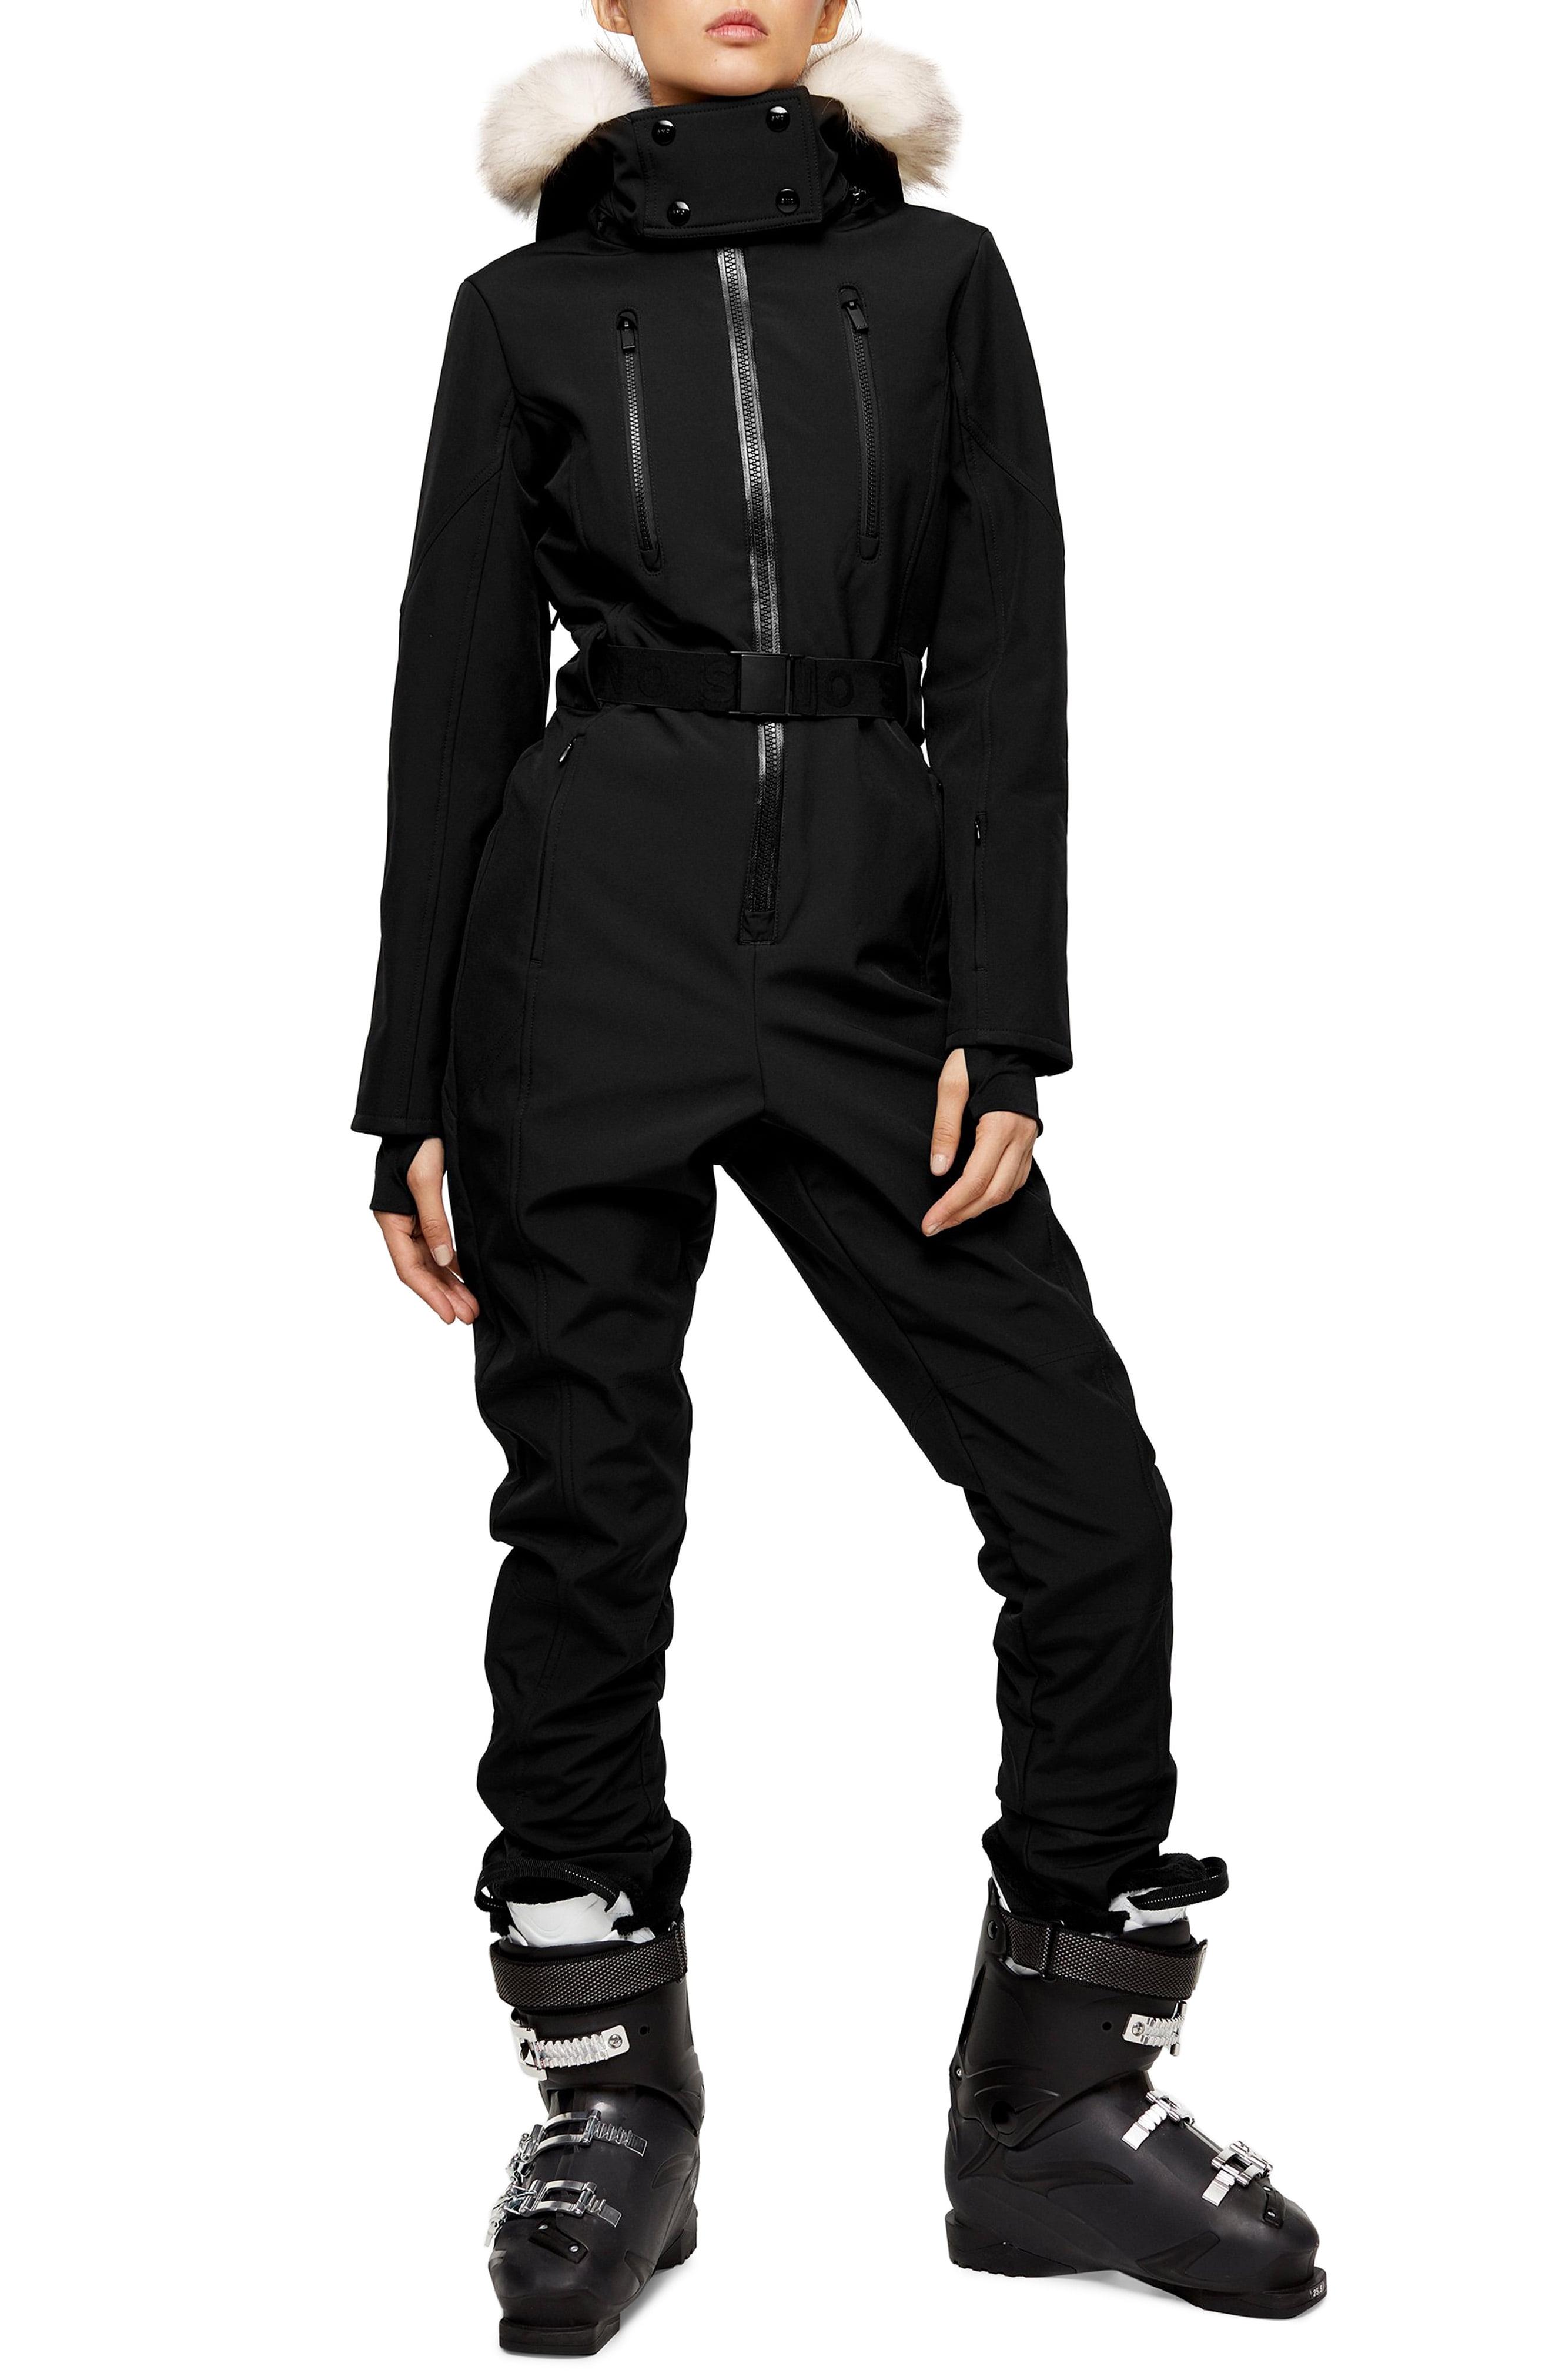 TOPSHOP black Hooded Ski Snow Suit By Sno | Lyst